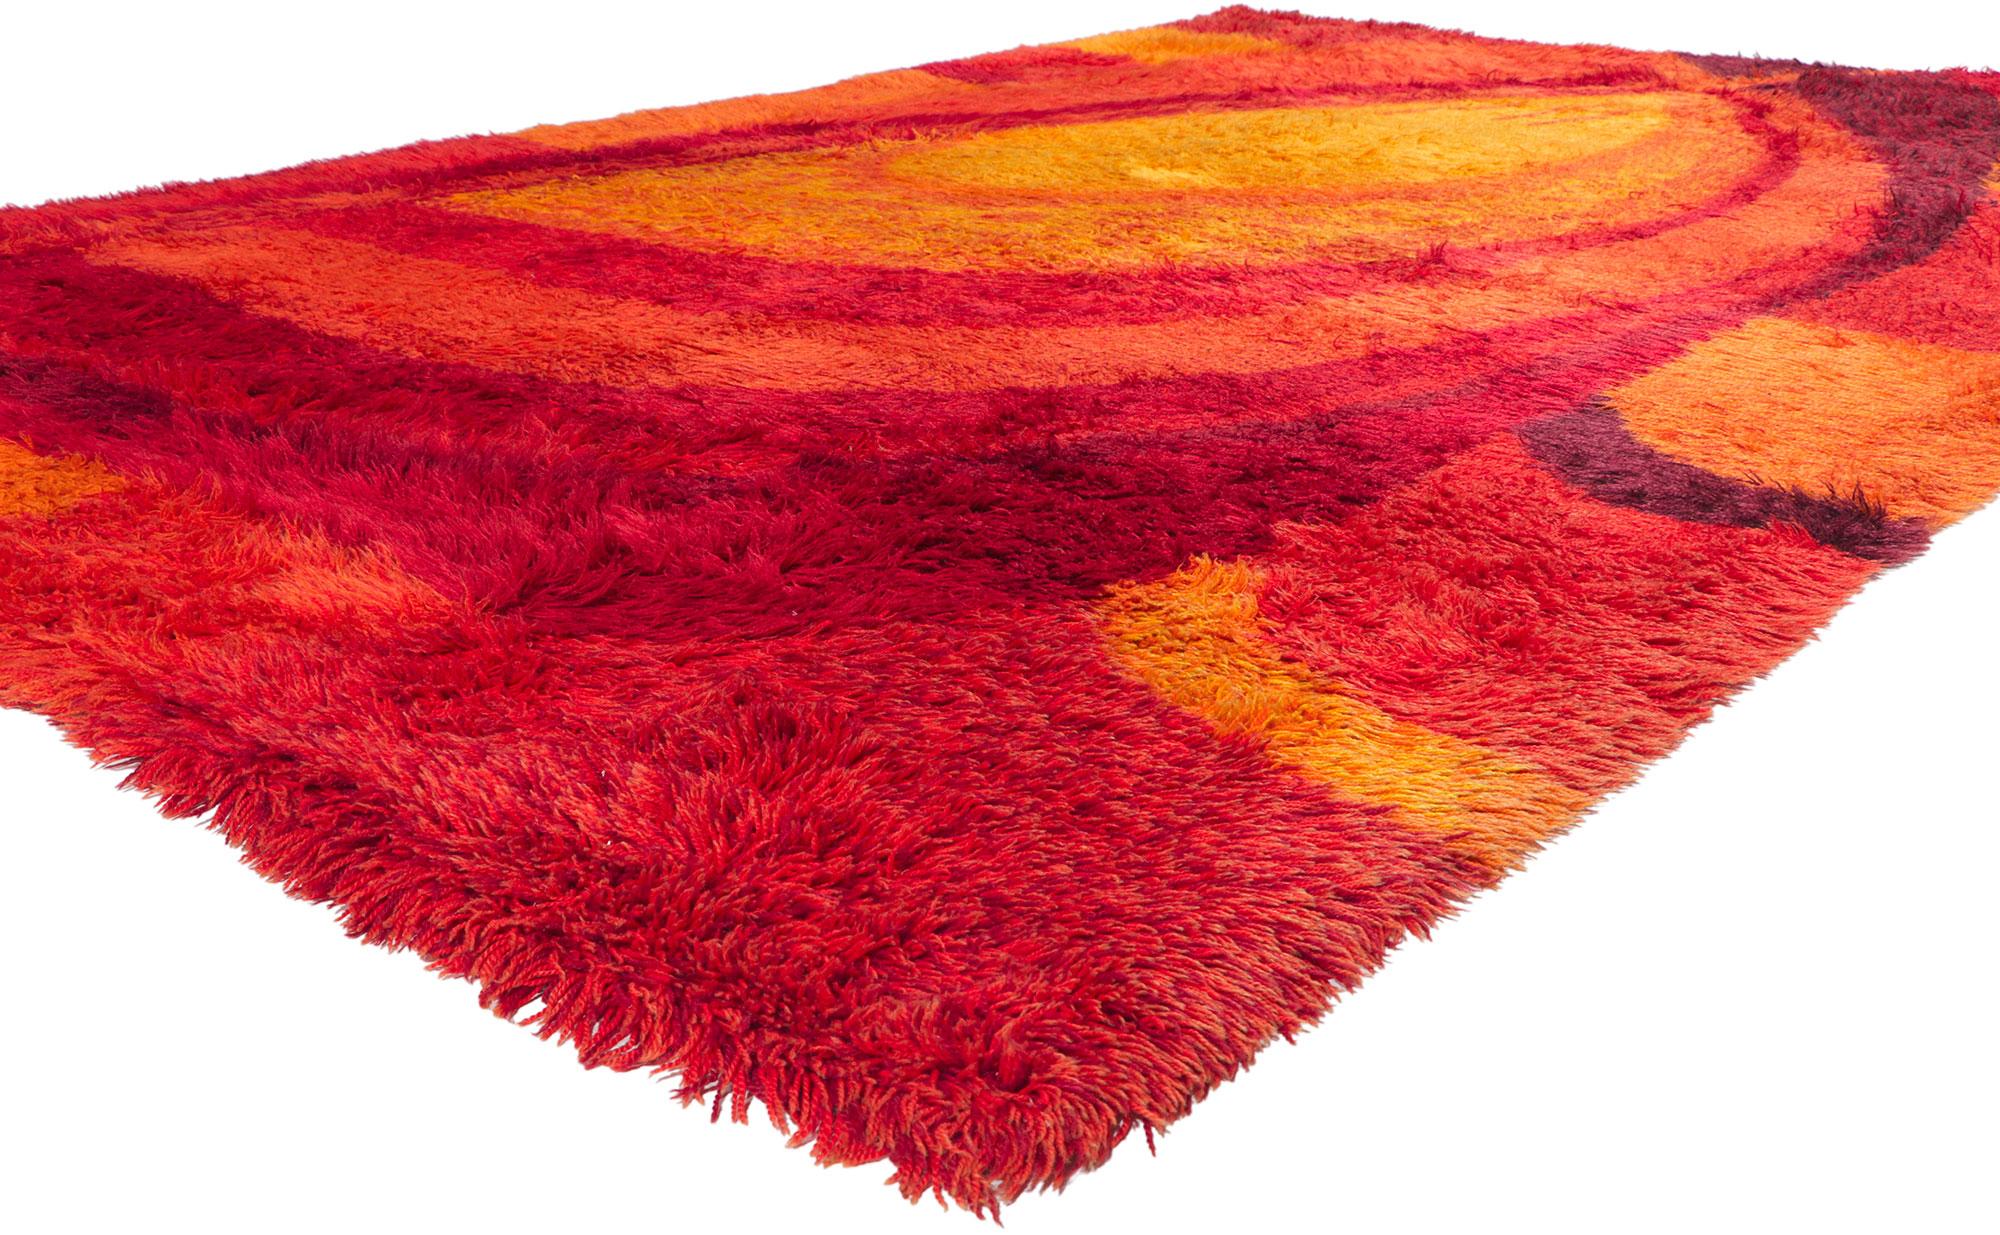 78352 Vintage Danish Ege Rya Rug, 07'06 x 11'10. Ege Rya rugs are a distinctive type of Danish rug from the mid-20th century, known for their deep pile and modernist, often abstract designs. Part of the Scandinavian design movement, these rugs are